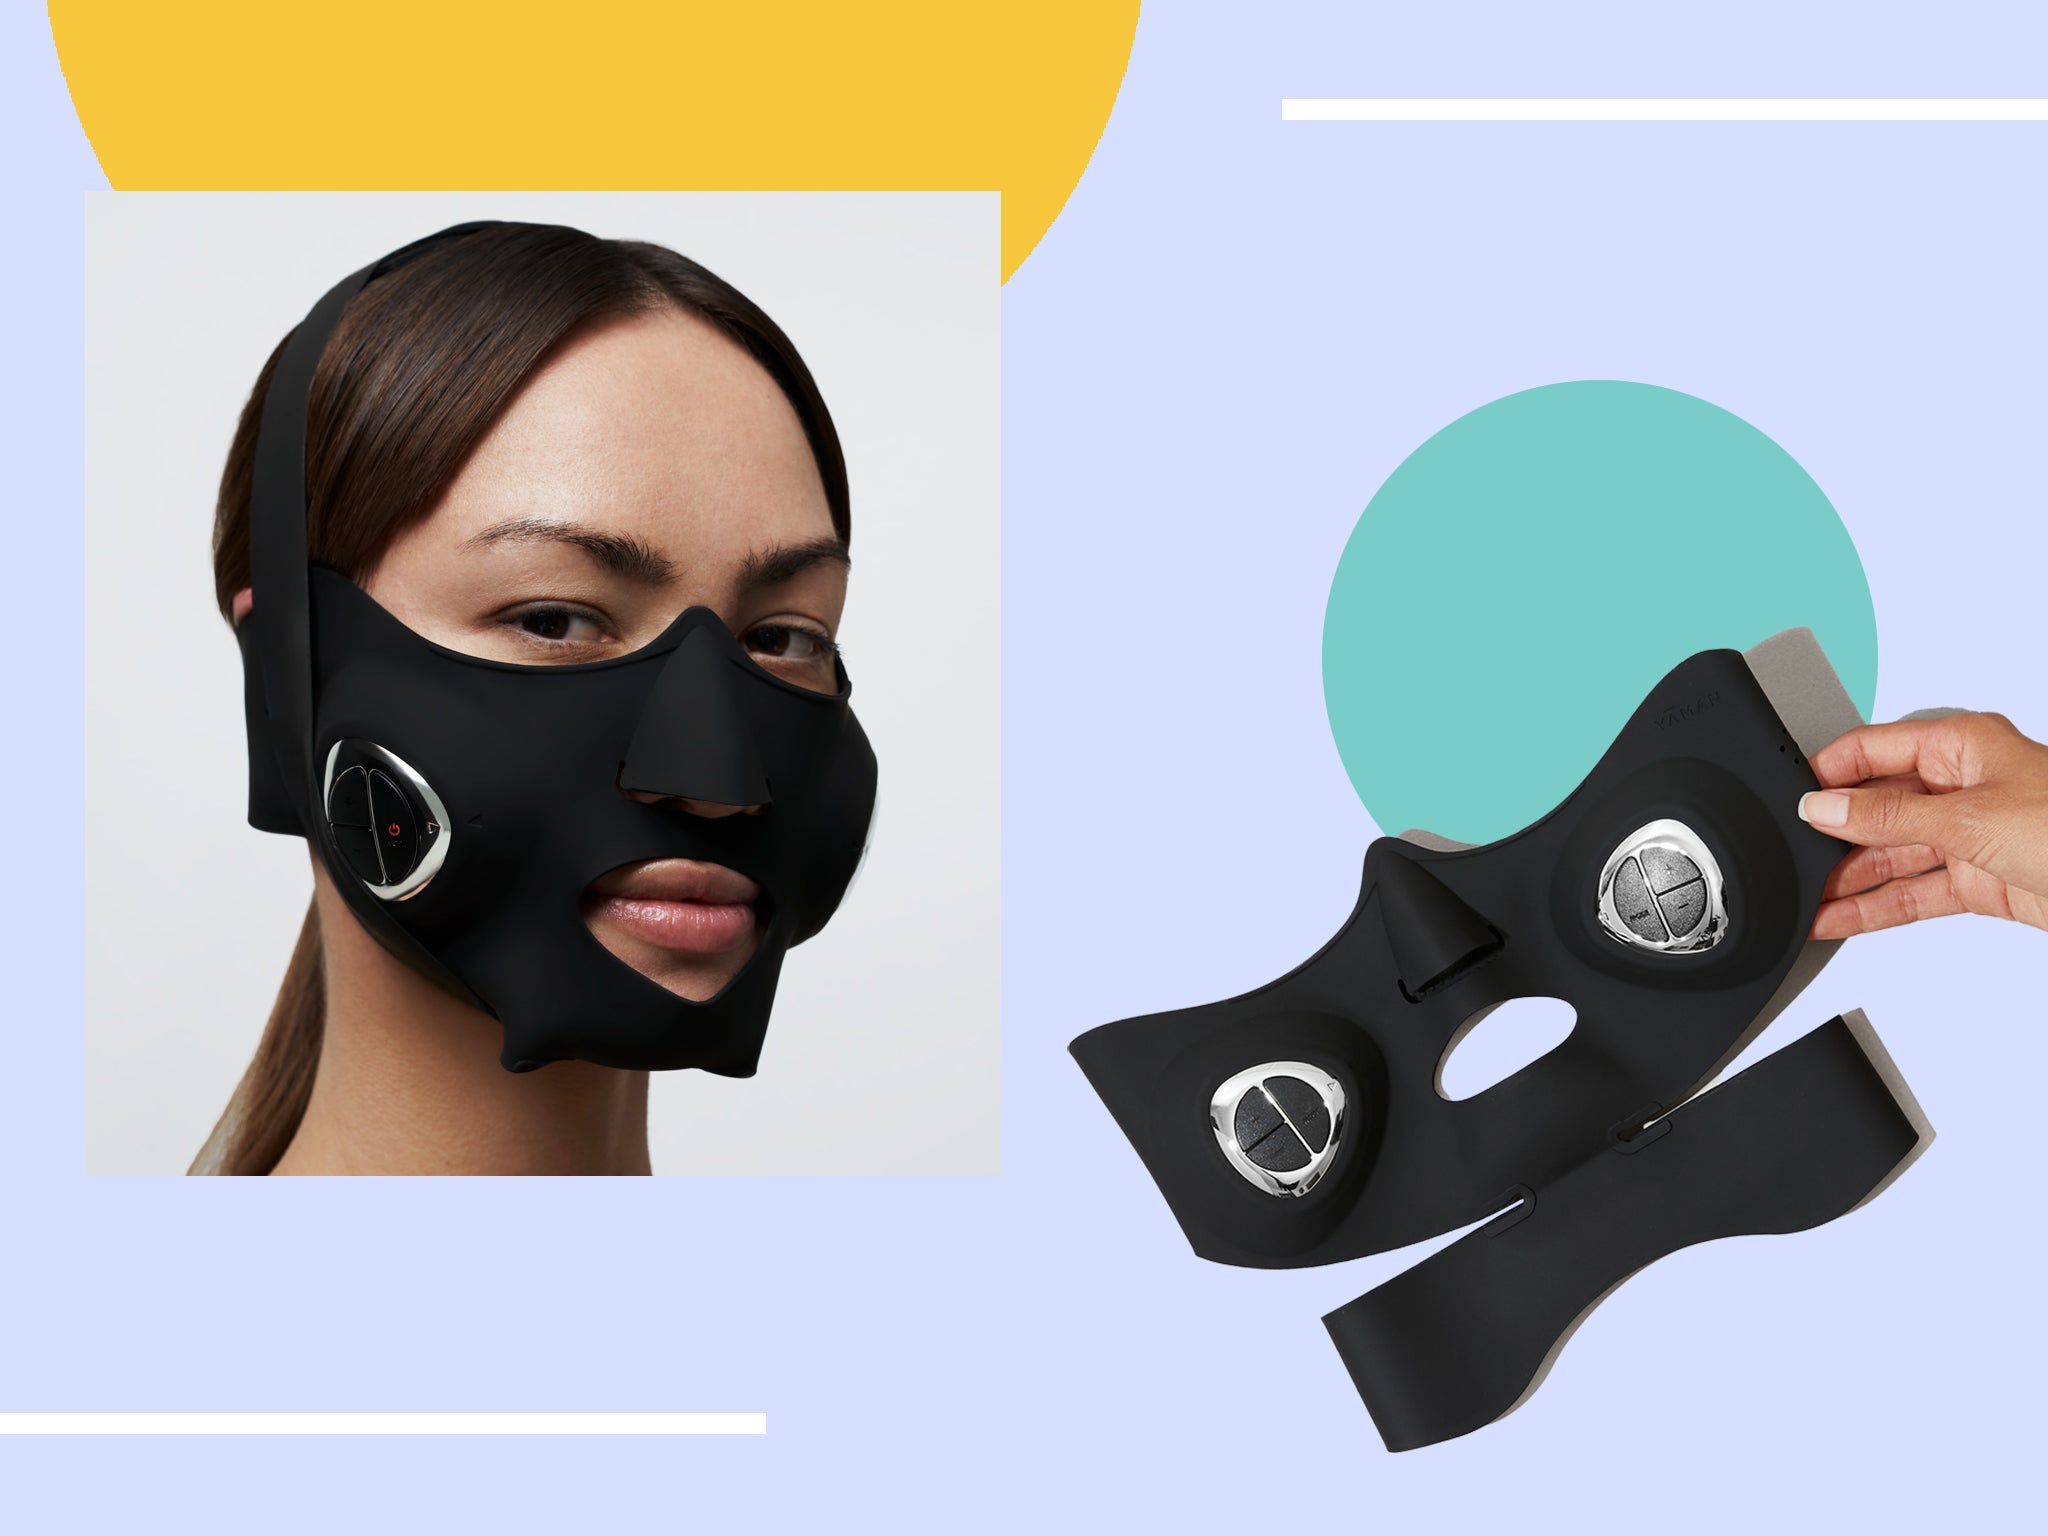 Our reviewer trialled the FaceGym medi lift mask every day for a week, using different modes and intensity levels